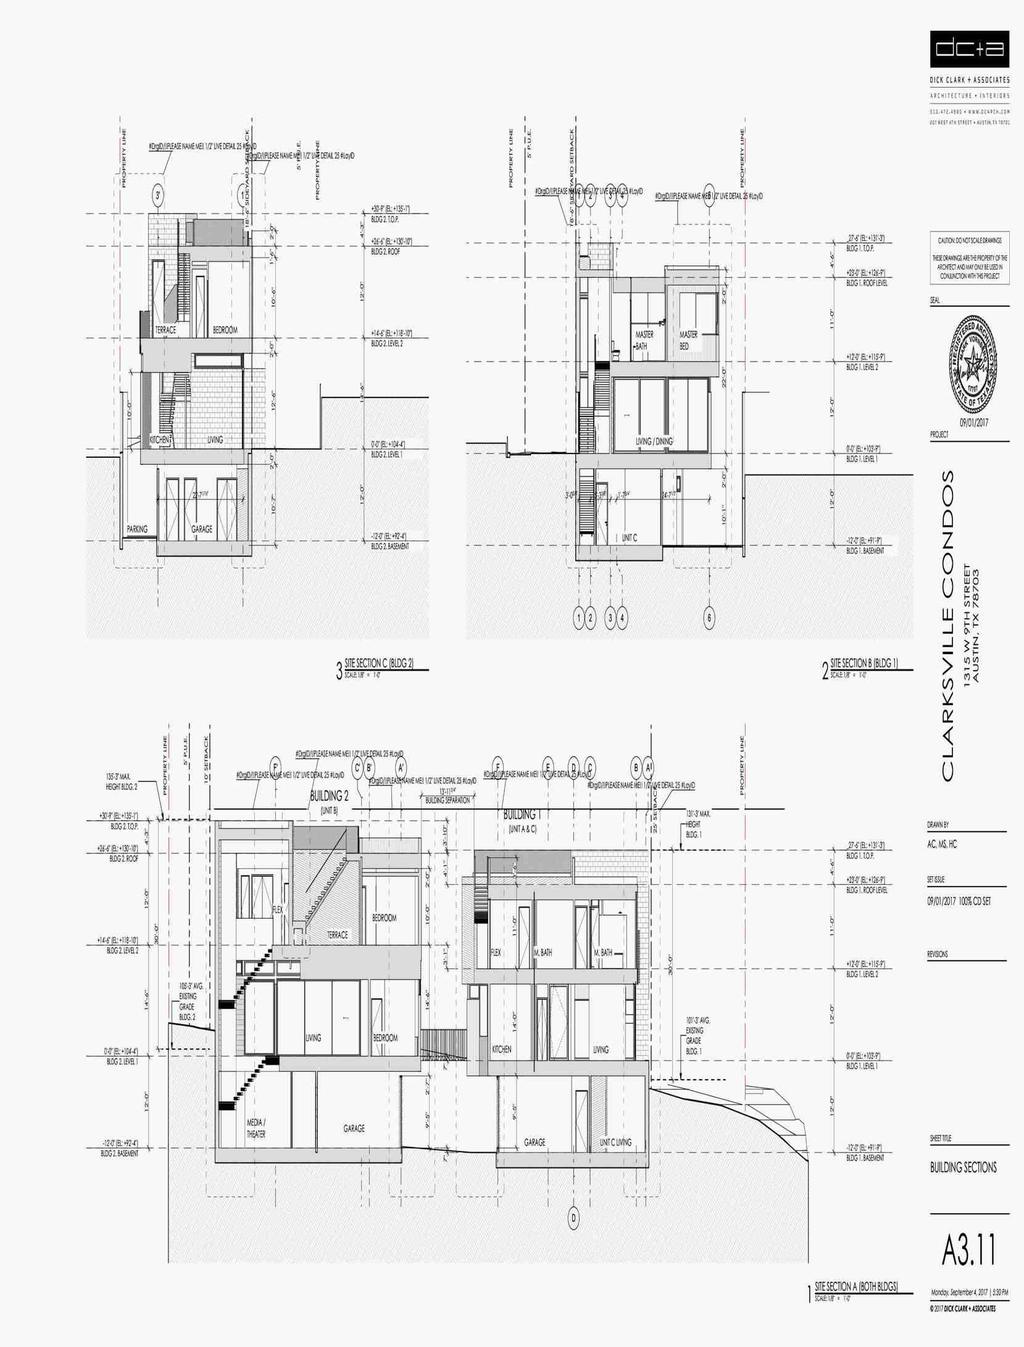 Plans and Elevations - Page 7 Form SCNLGL - "TOTAL"